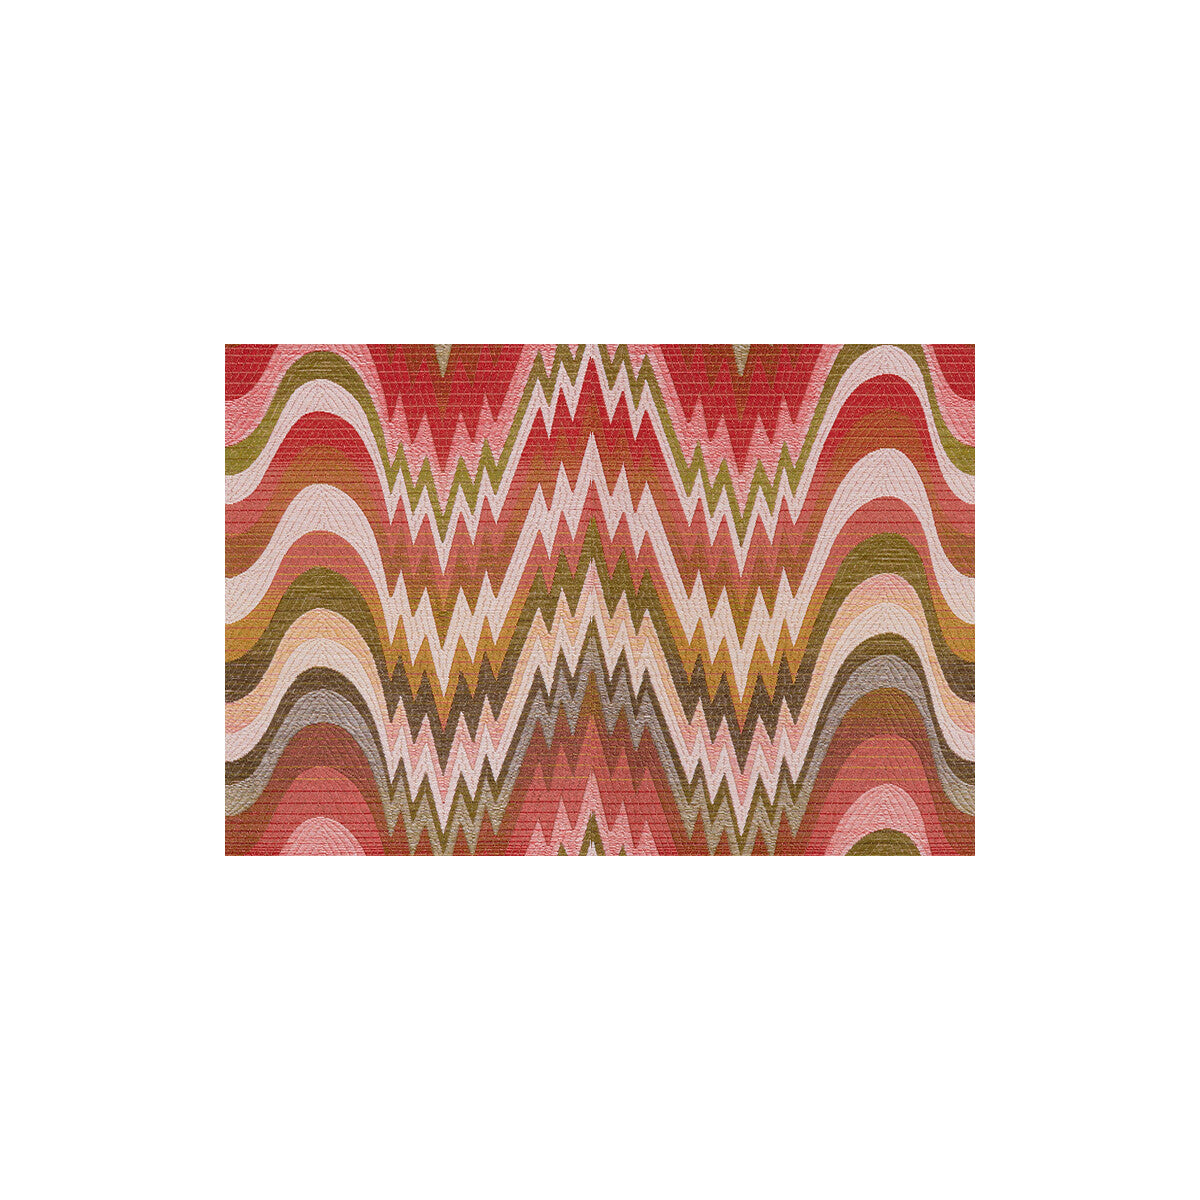 Acid Palm fabric in watermelon color - pattern 32503.7.0 - by Kravet Design in the Jonathan Adler Utopia collection